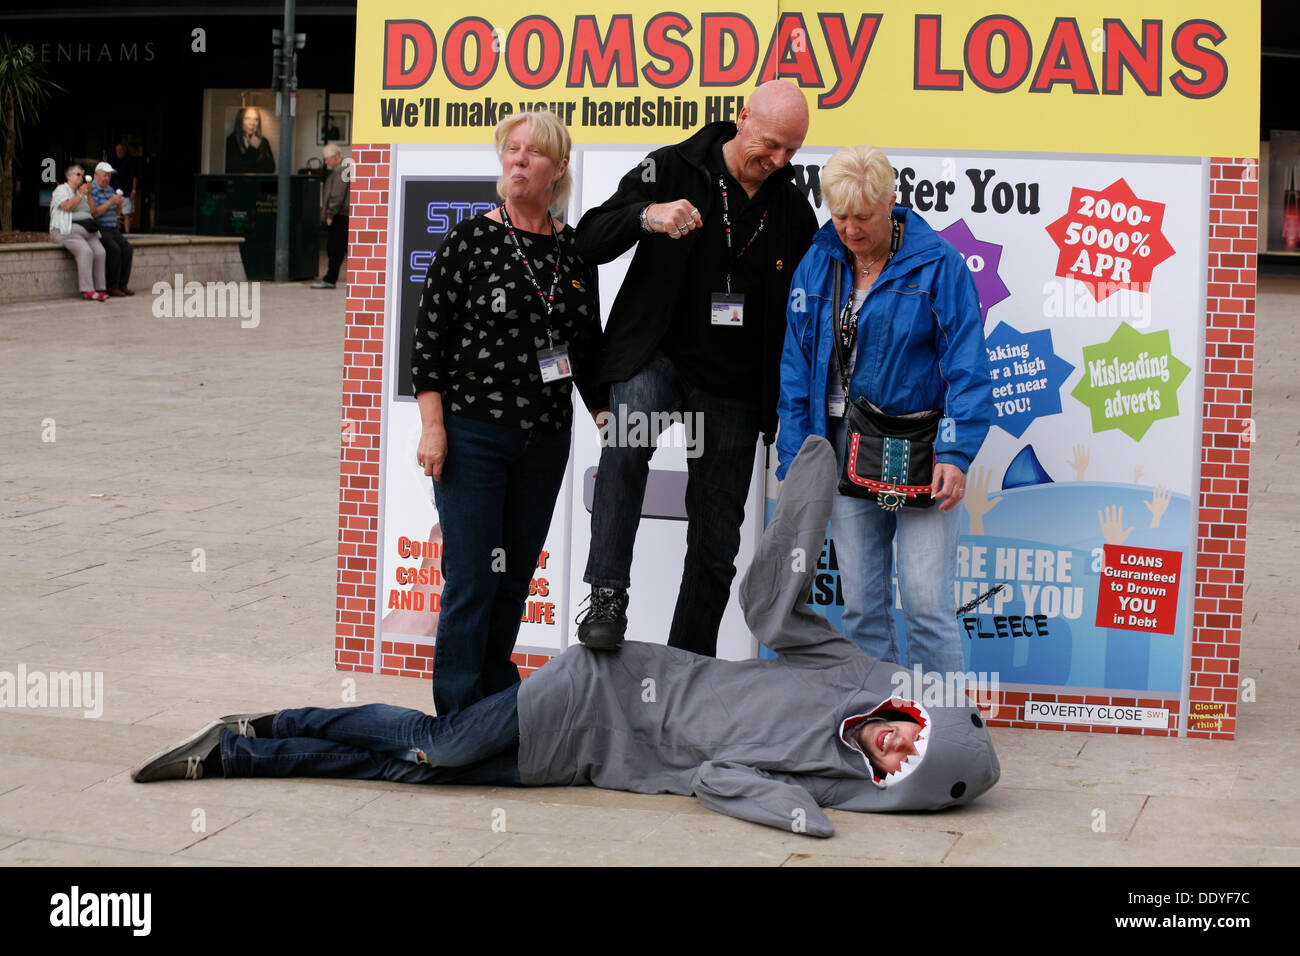 Bournemouth, UK 9 September 2013. A 'pop up doomsday payday loan shop' is set up in Bournemouth Square to coincide with latest Unite figures on the amount people are borrowing to get through the month; reportedly a new survey reveals the amount of money that hard pressed Unite members have to borrow each month to make ends meet has tripled since 2012 to £660. Credit:  Carolyn Jenkins/Alamy Live News Stock Photo